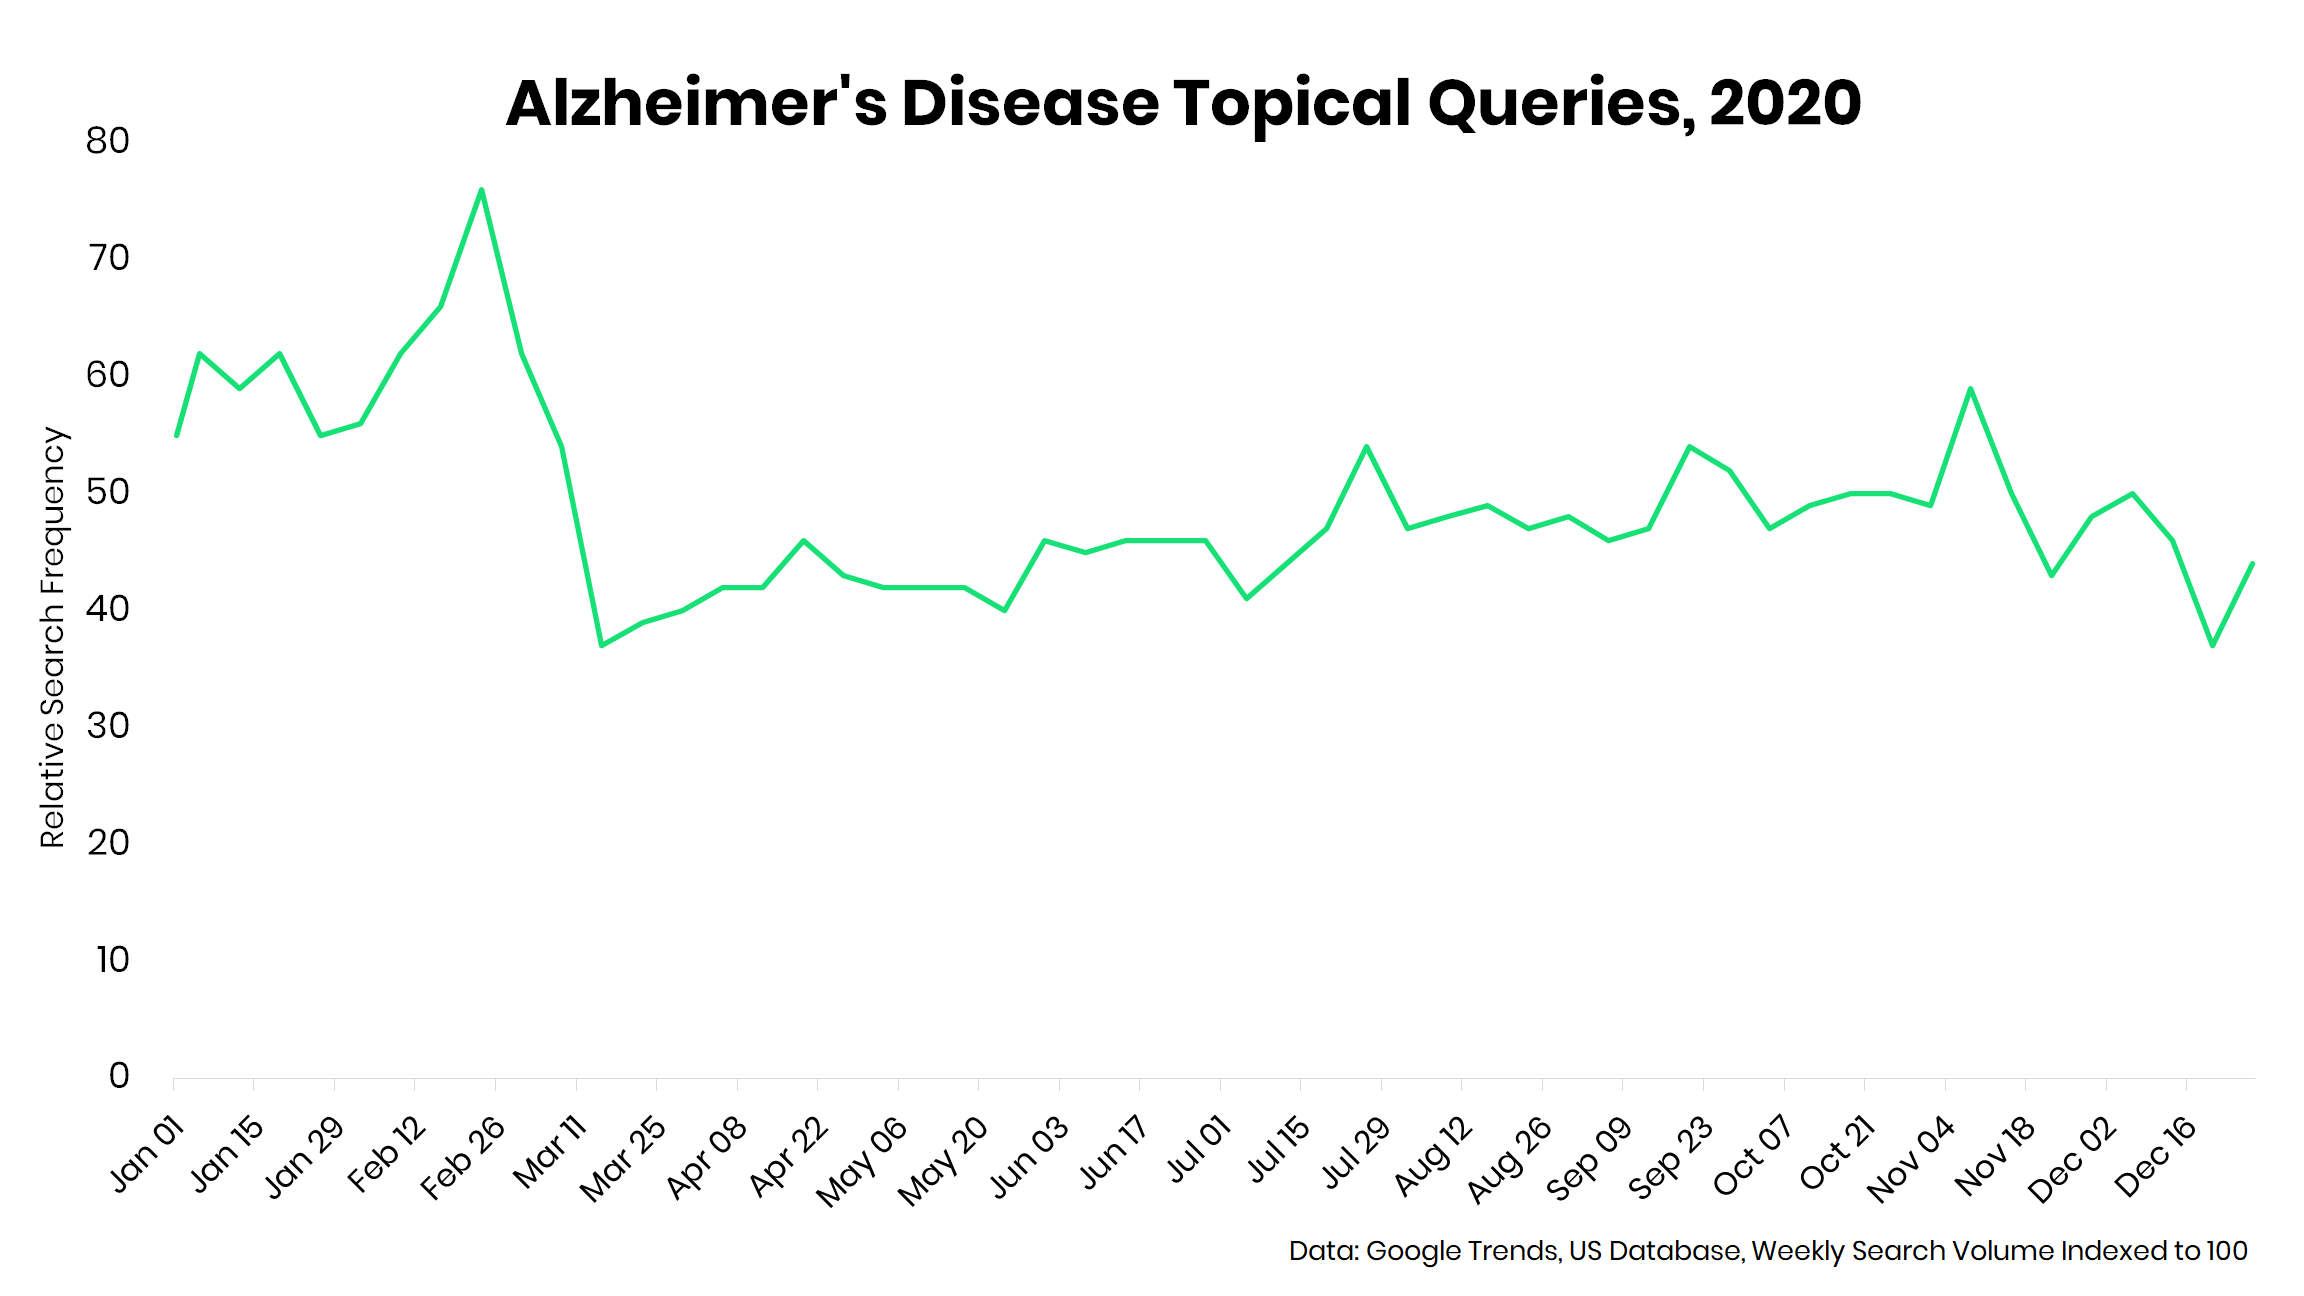 A chart showing the decreasing trend of search queries to Alzheimer's Disease topics immediately following the first wave of the COVID pandemic in 2020.